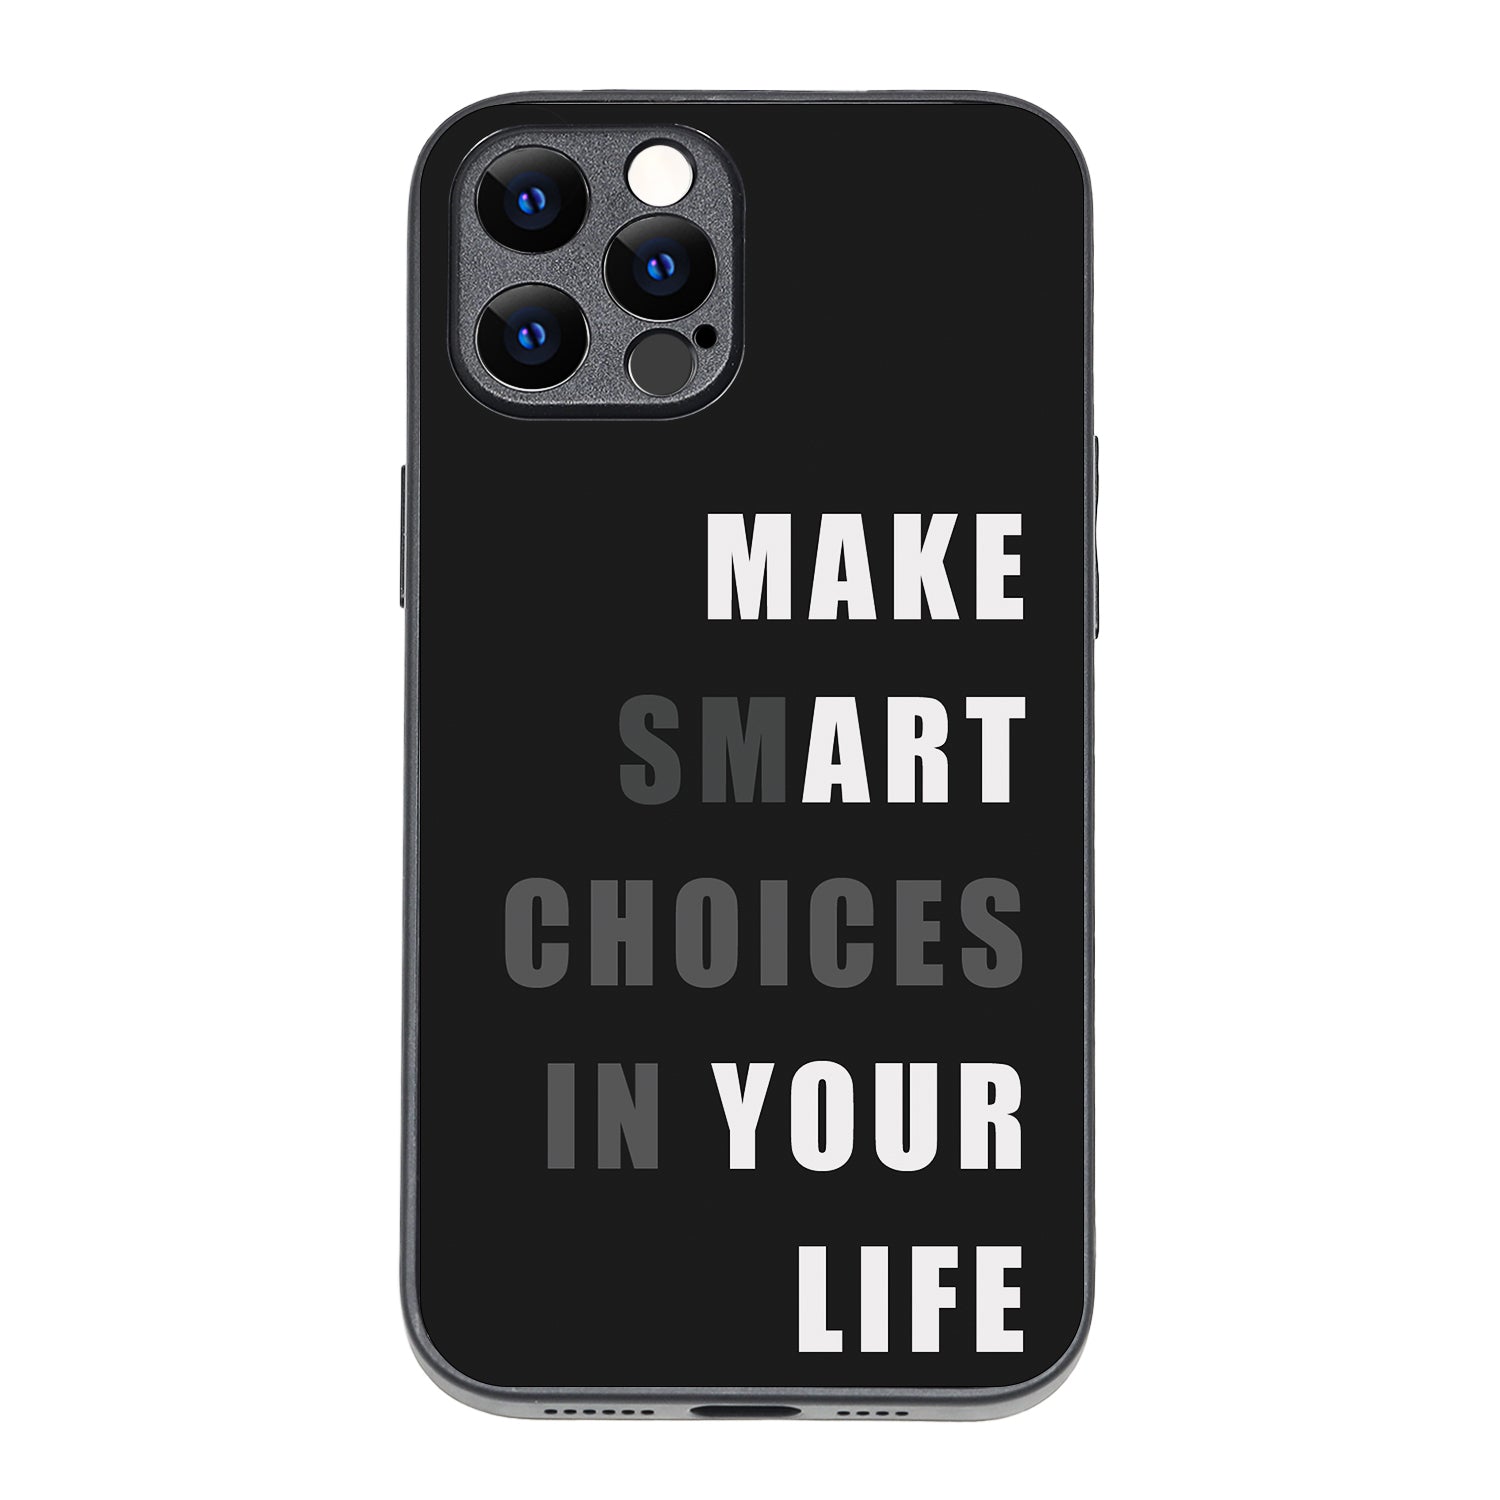 Smart Choices Motivational Quotes iPhone 12 Pro Max Case